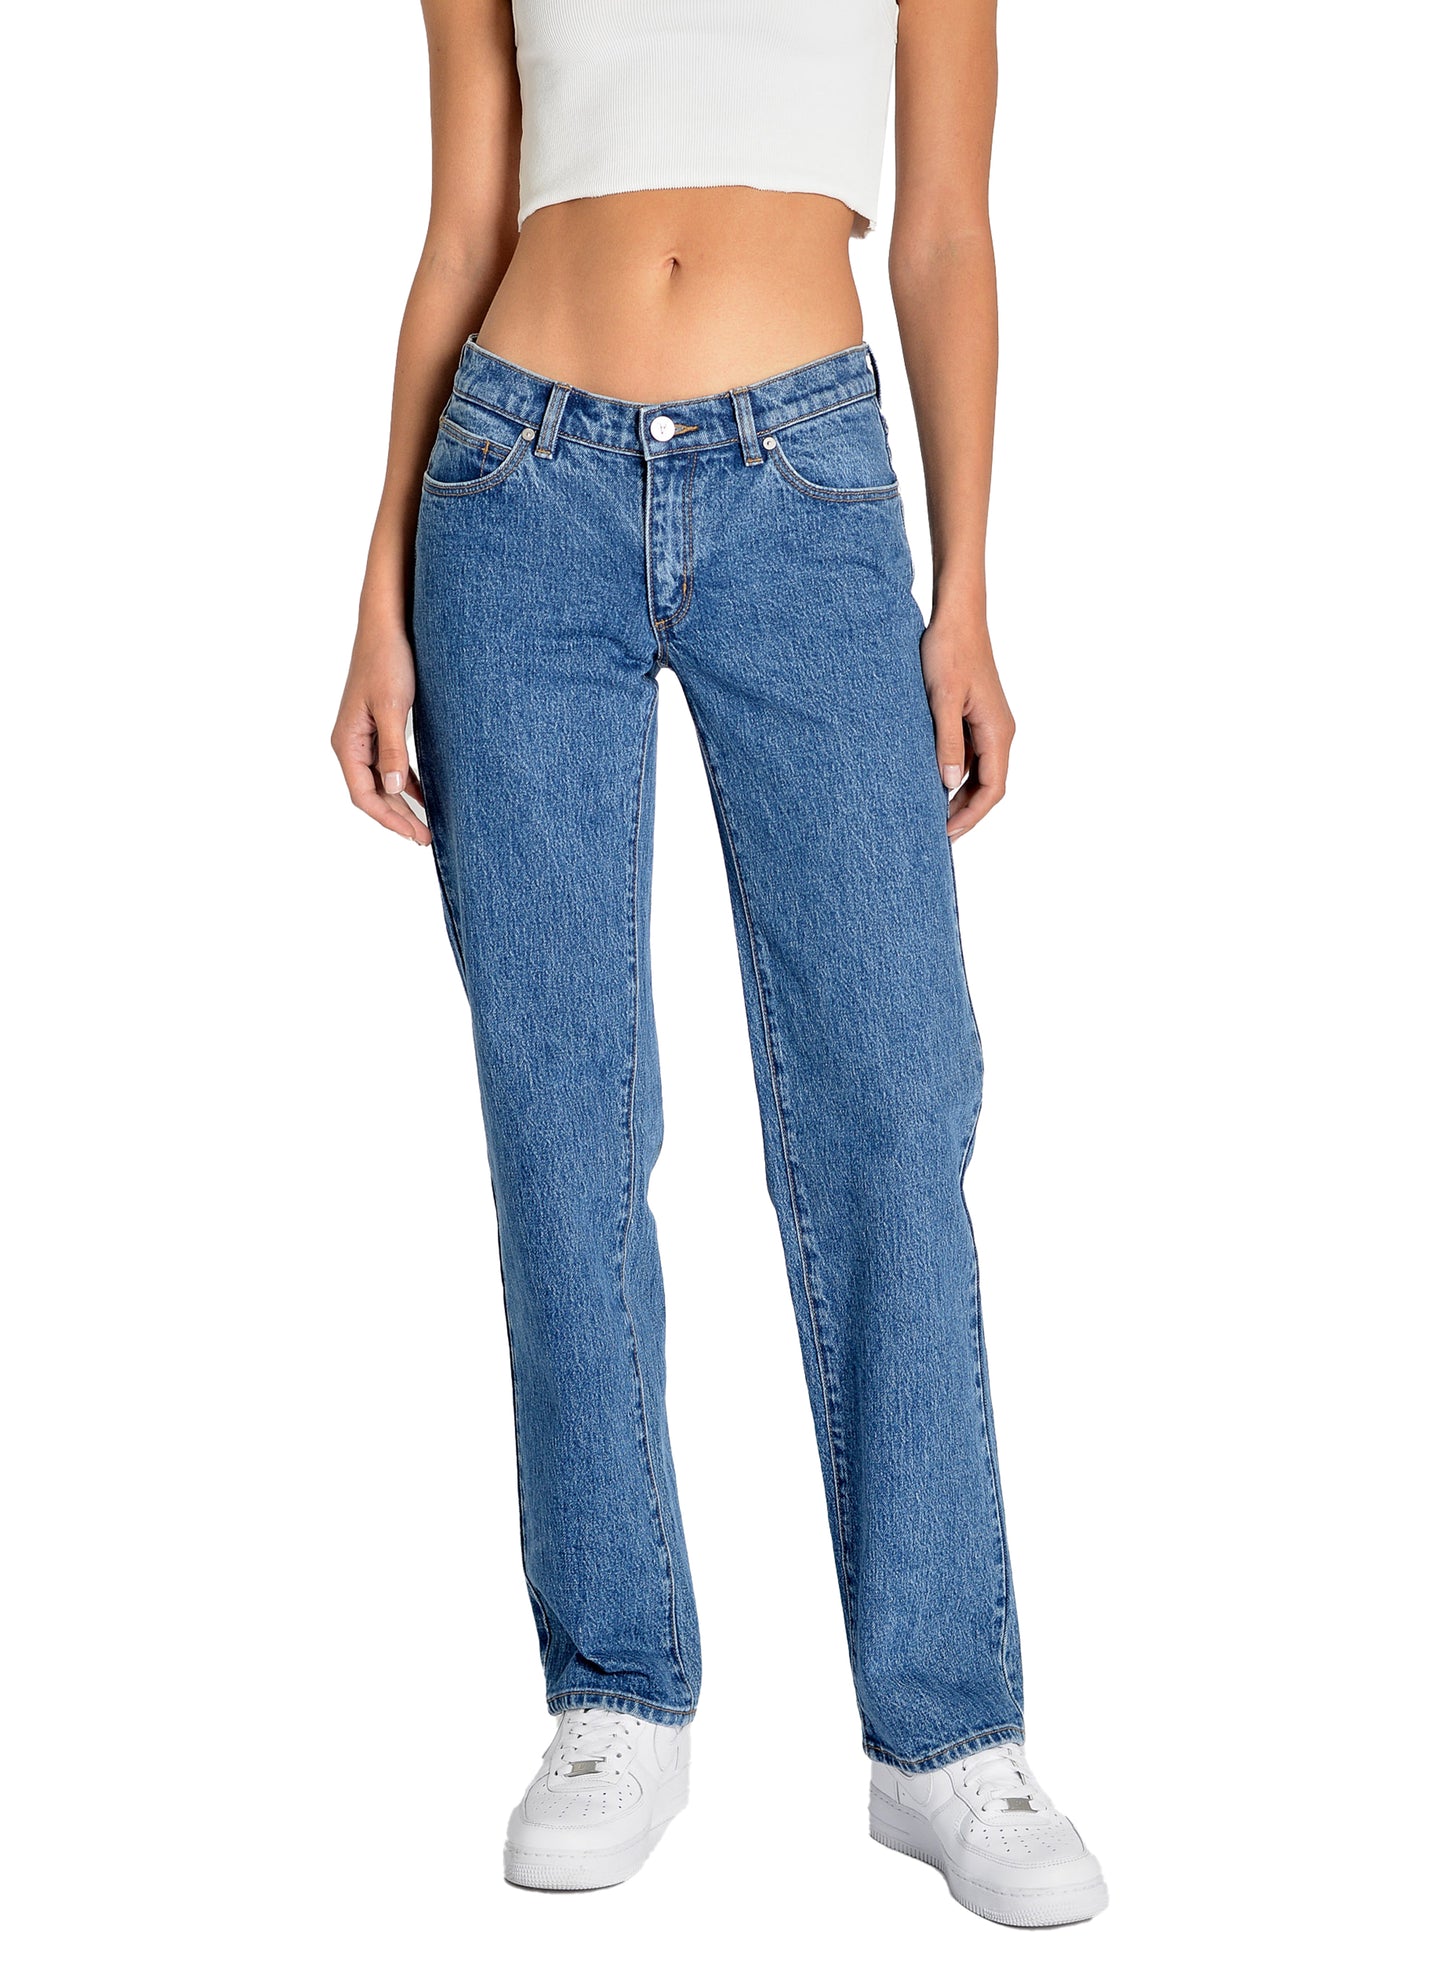 Abrand Jeans A 99 Low Straight Denim Jeans in Chantell